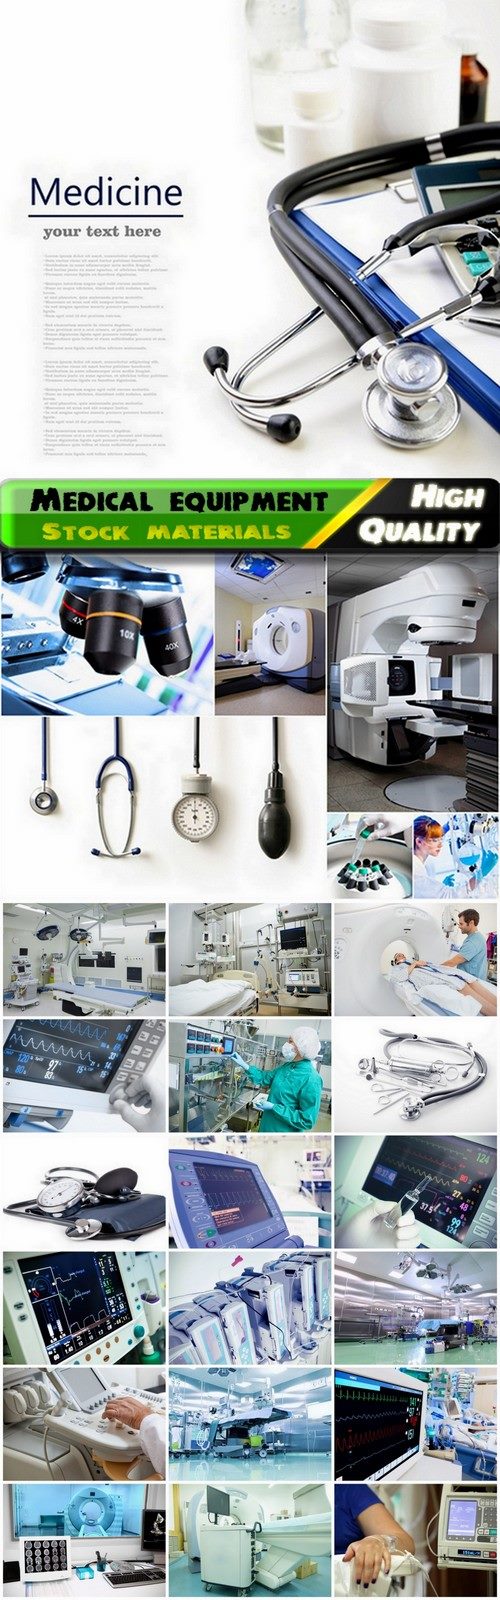 Treatment of patients and medical equipment - 25 HQ Jpg